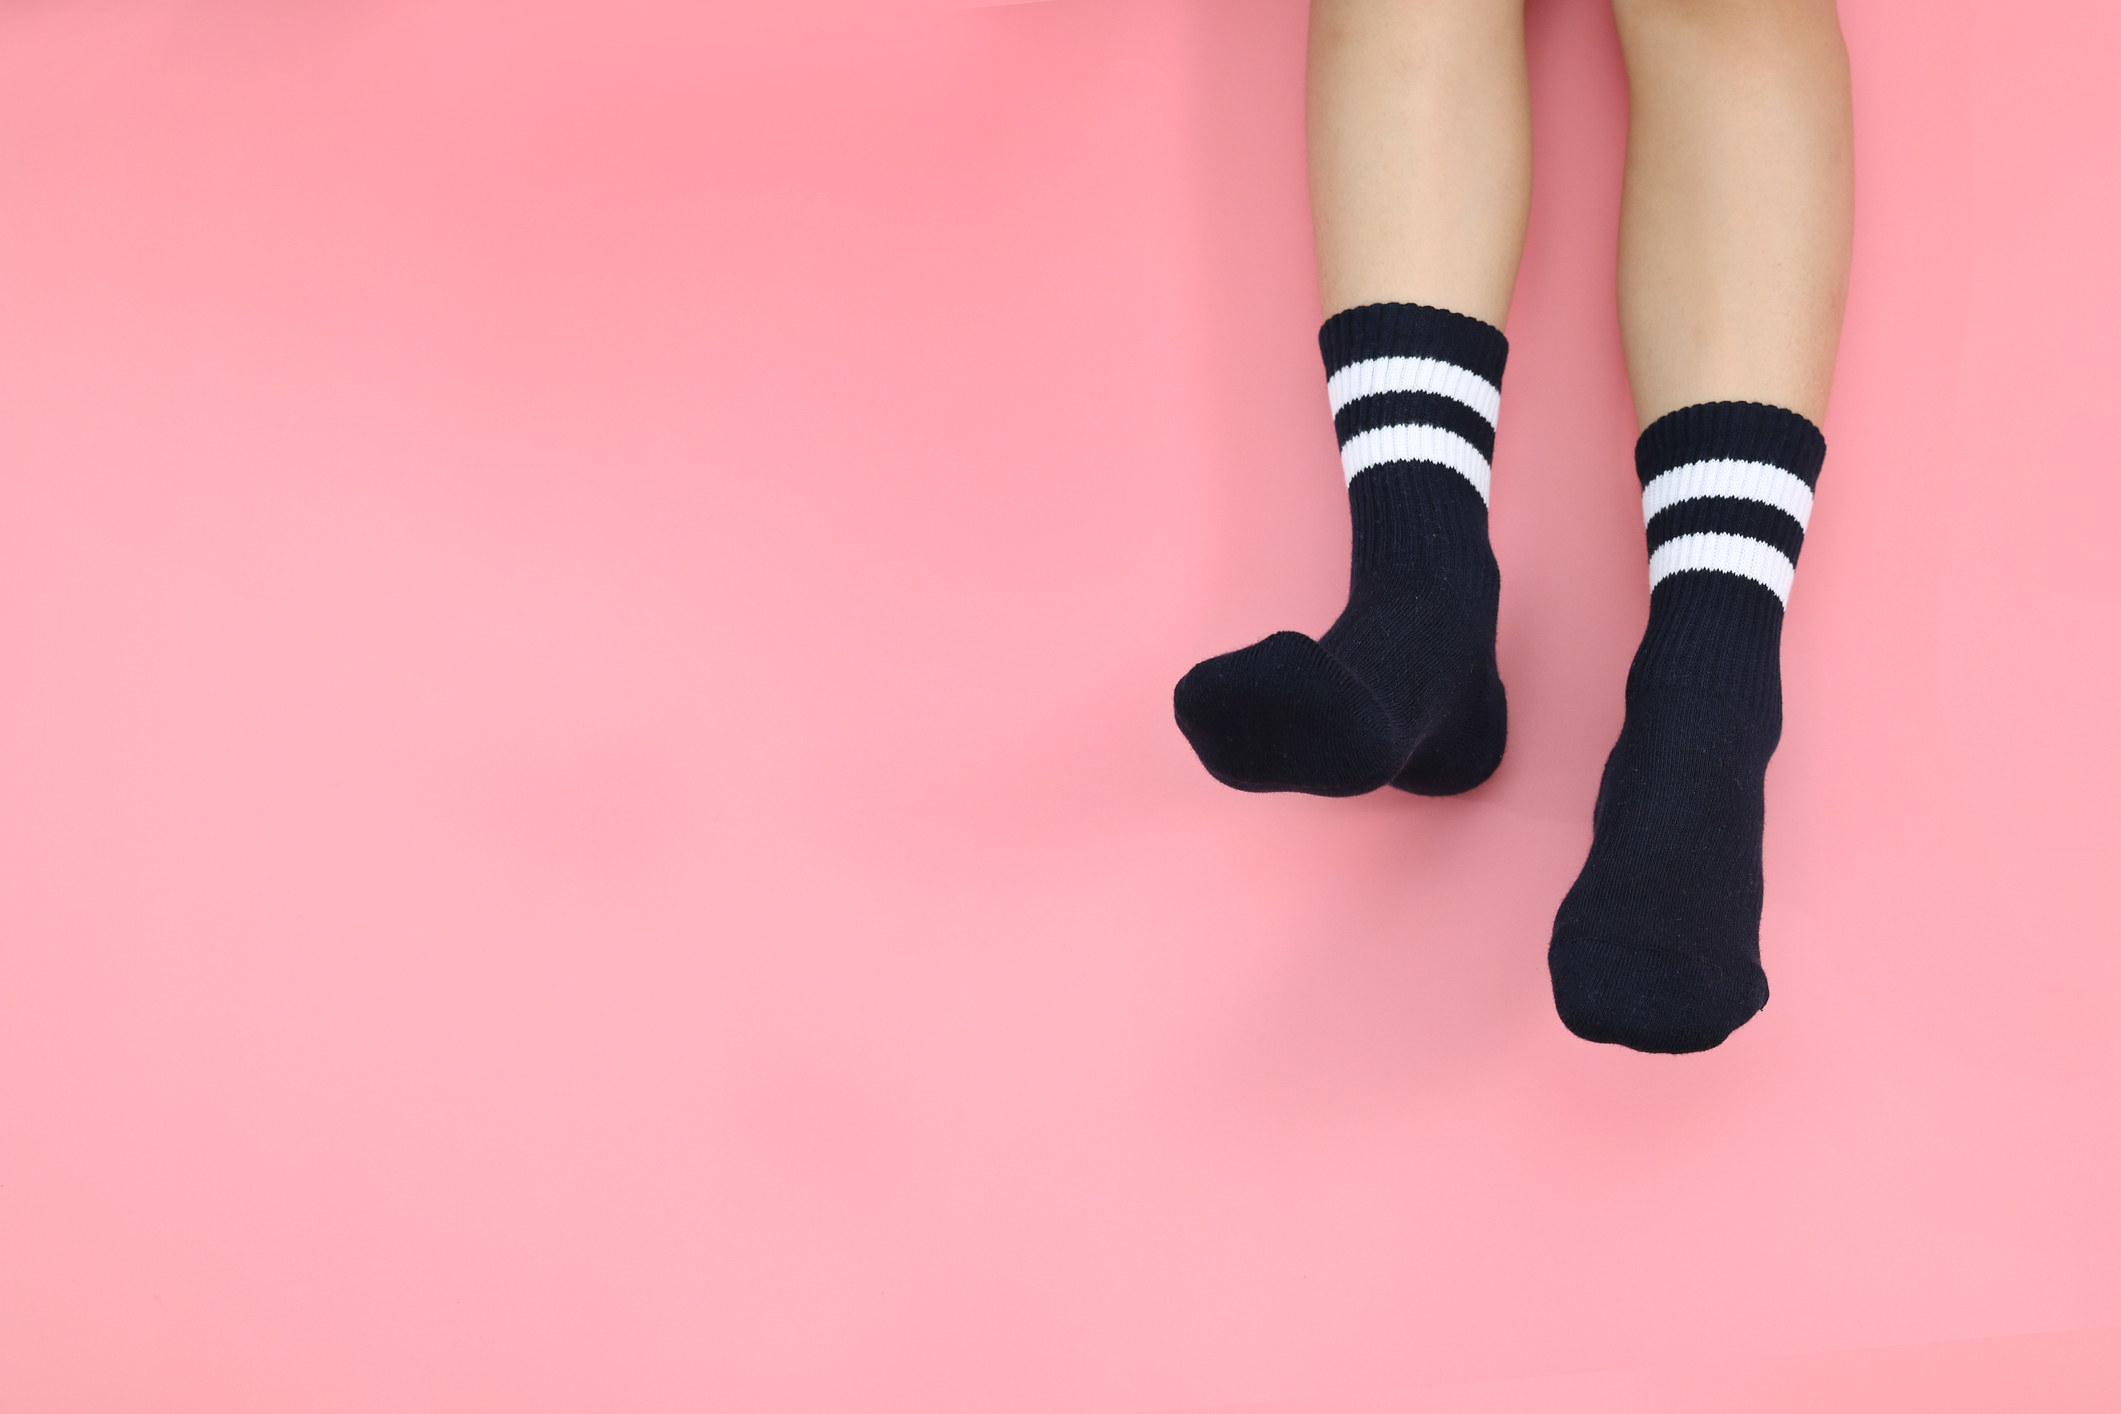 Black and white socks on a person.